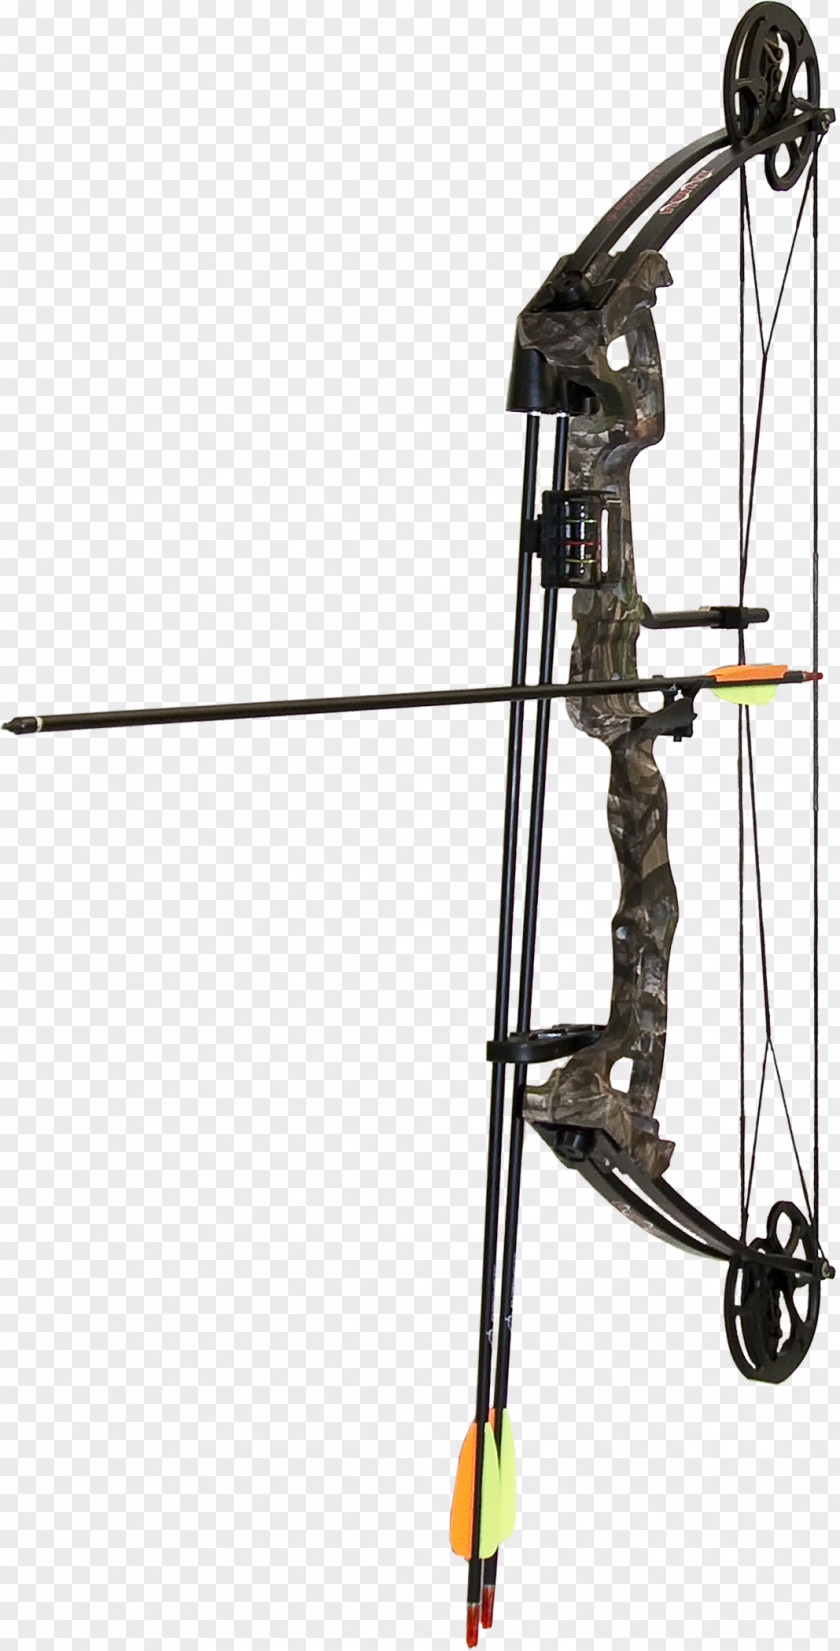 Archery Compound Bows Bow And Arrow Hunting PNG